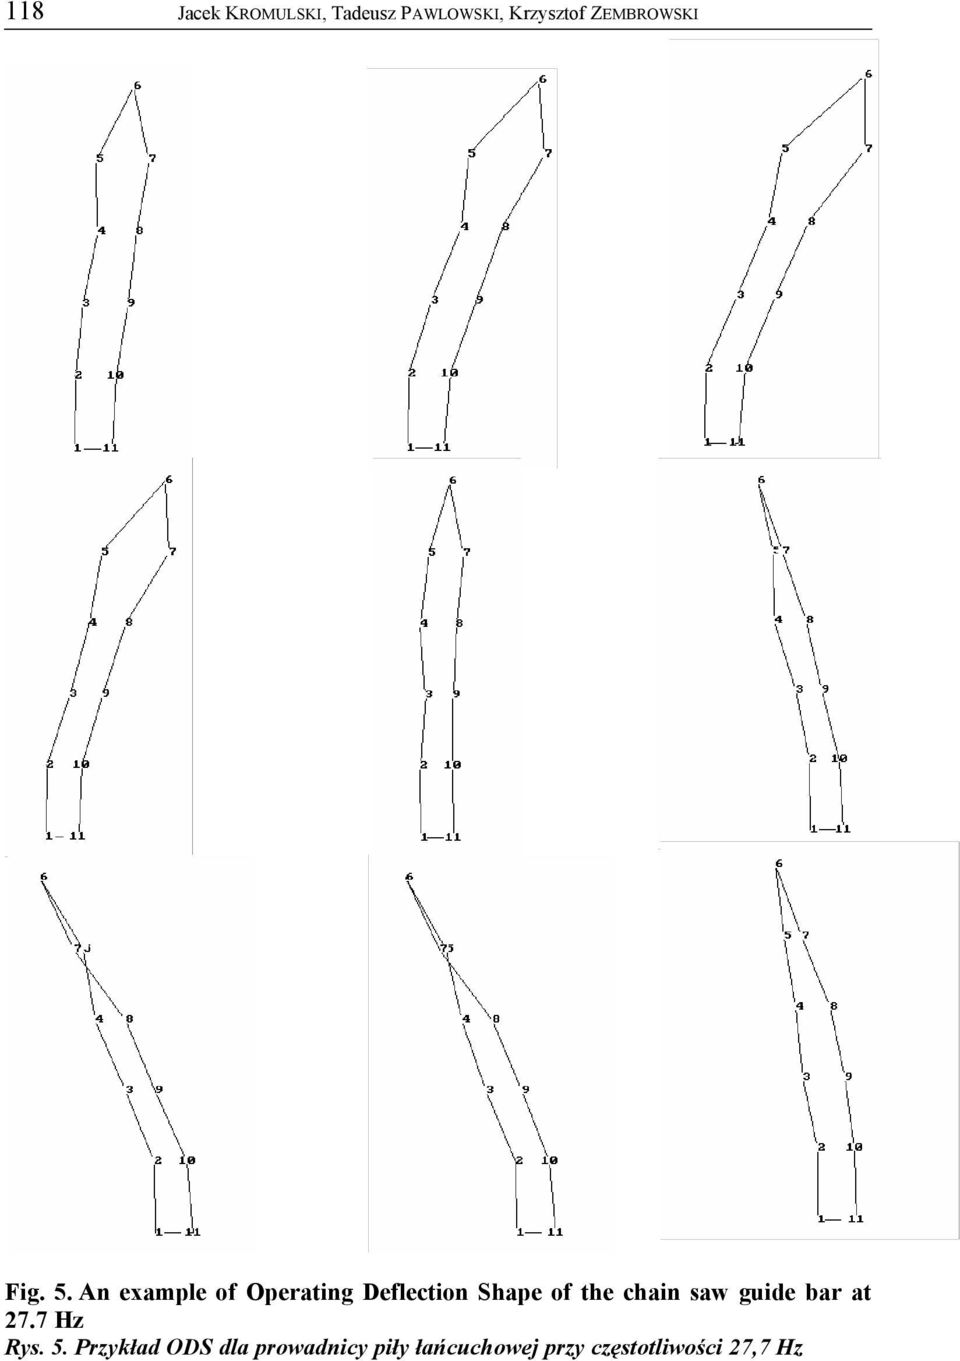 An example of Operating Deflection Shape of the chain